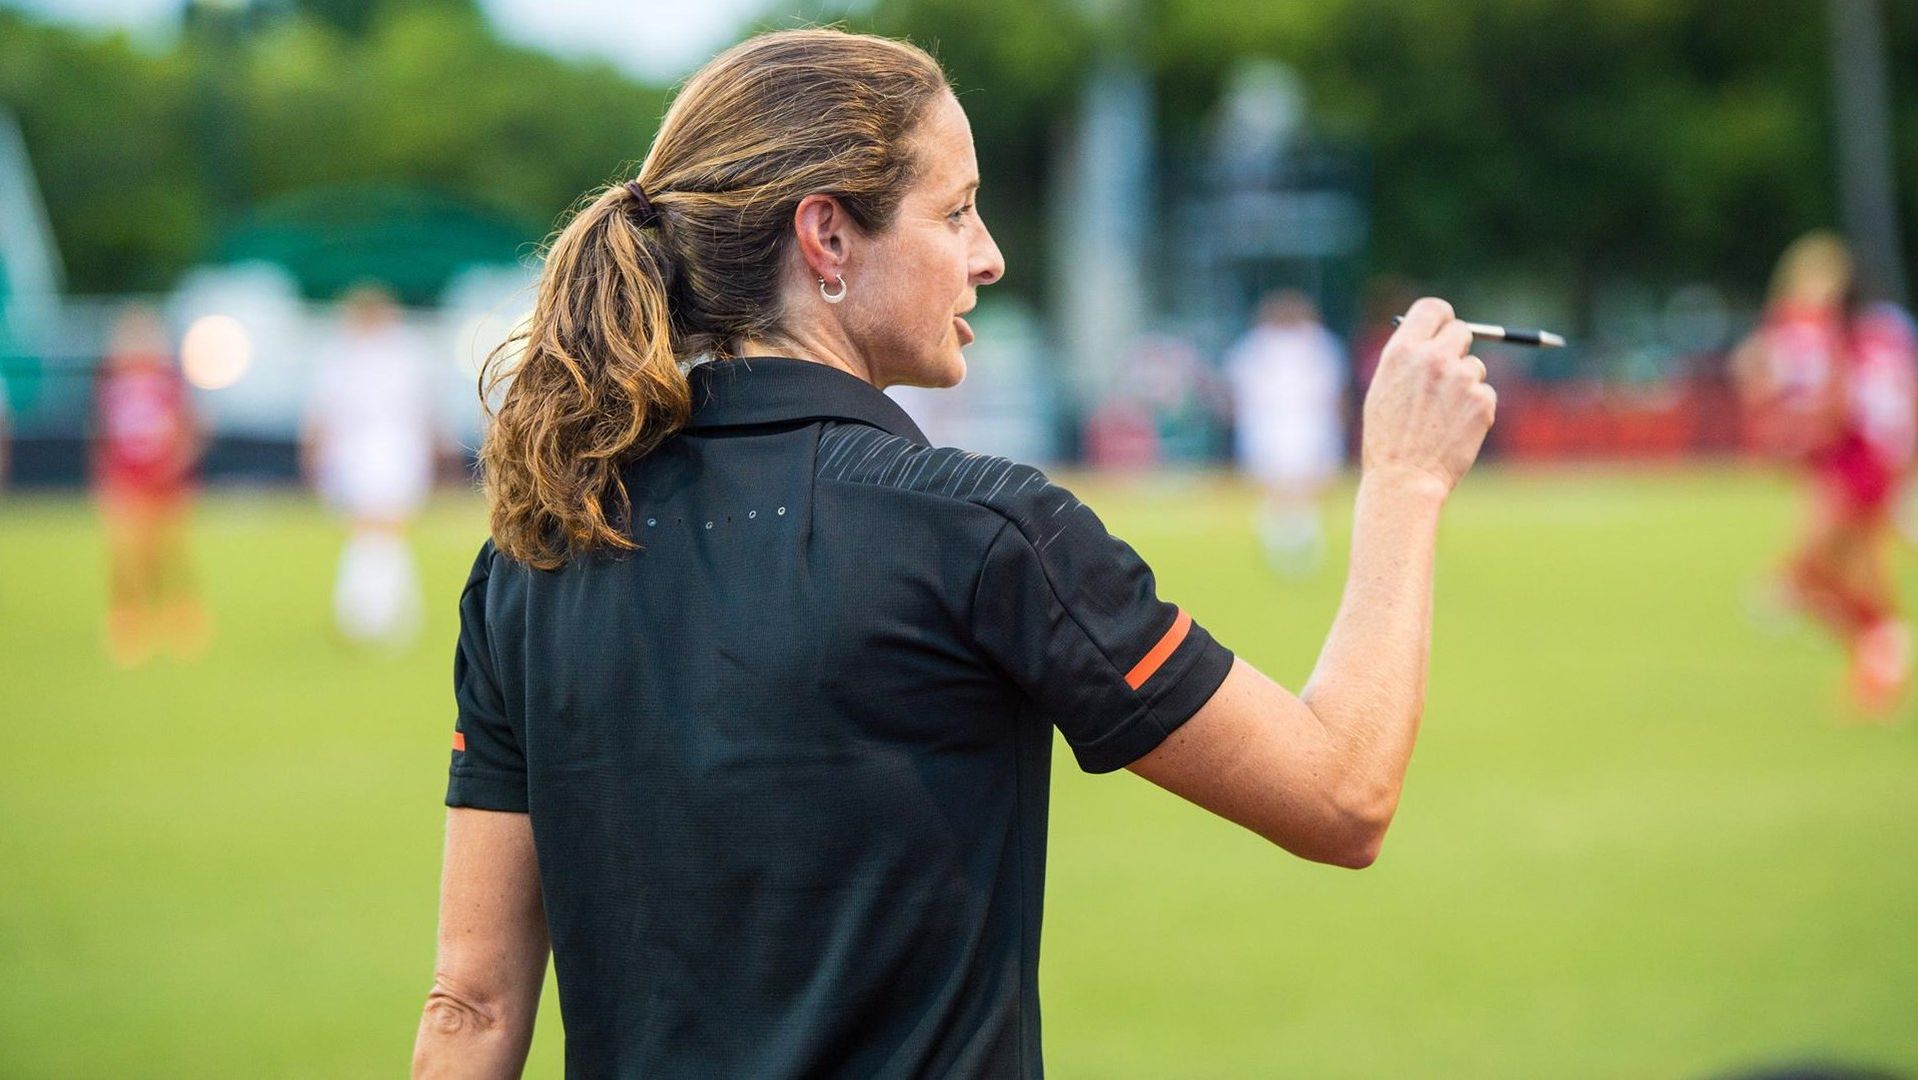 Sarah Barnes' College ID Clinics and Miami Hurricanes Youth Camps